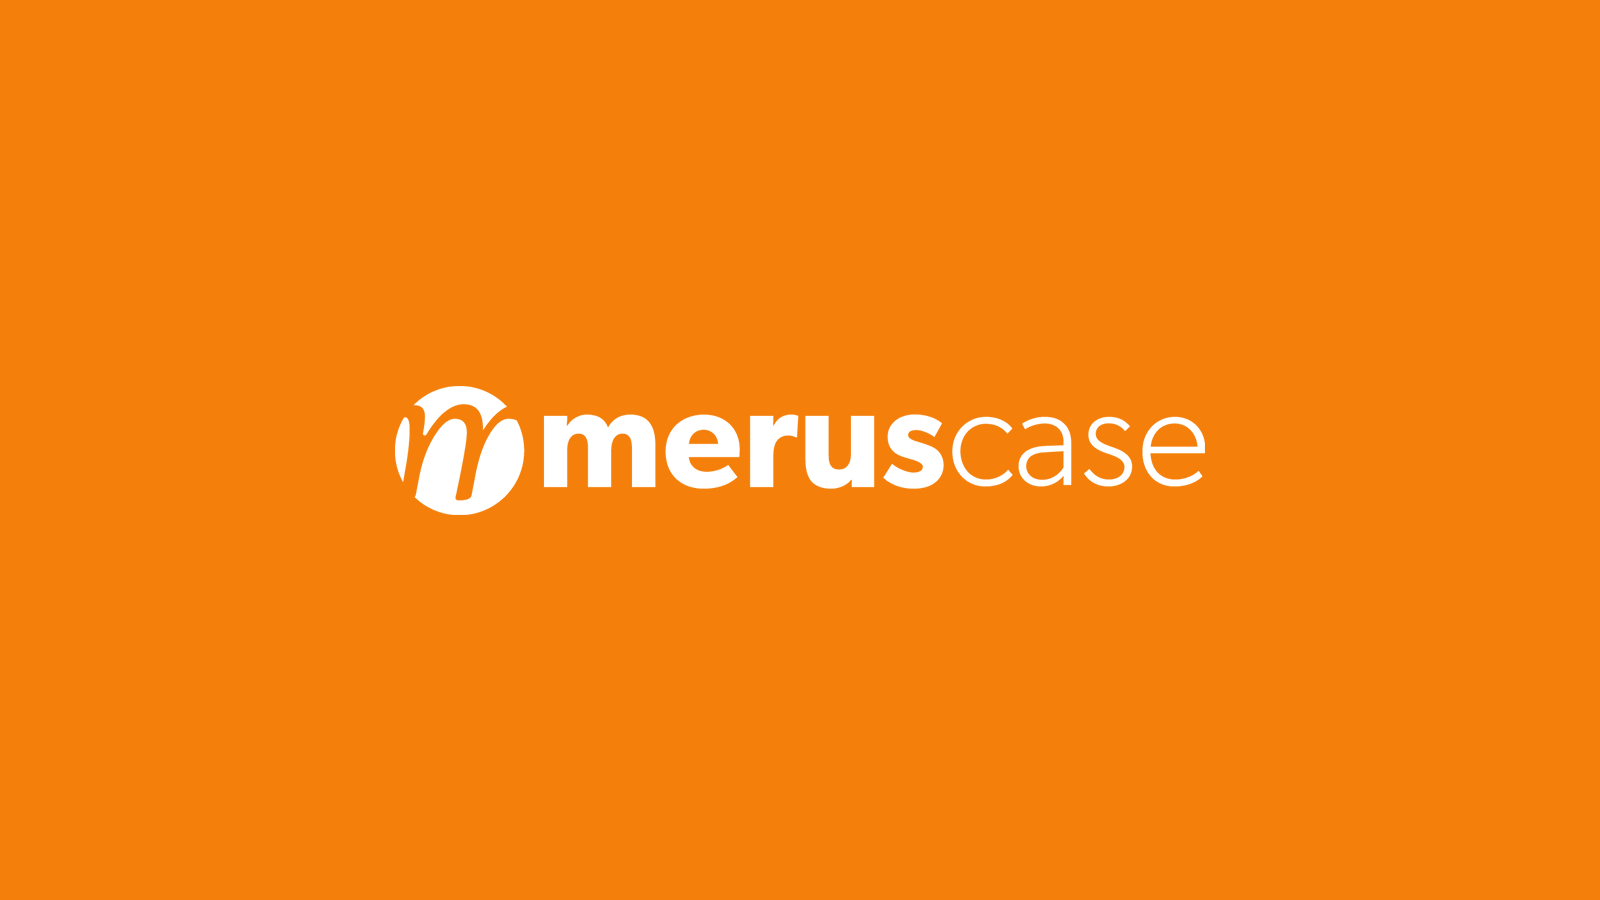 Image of Meruscase Law Practice Management Software logo